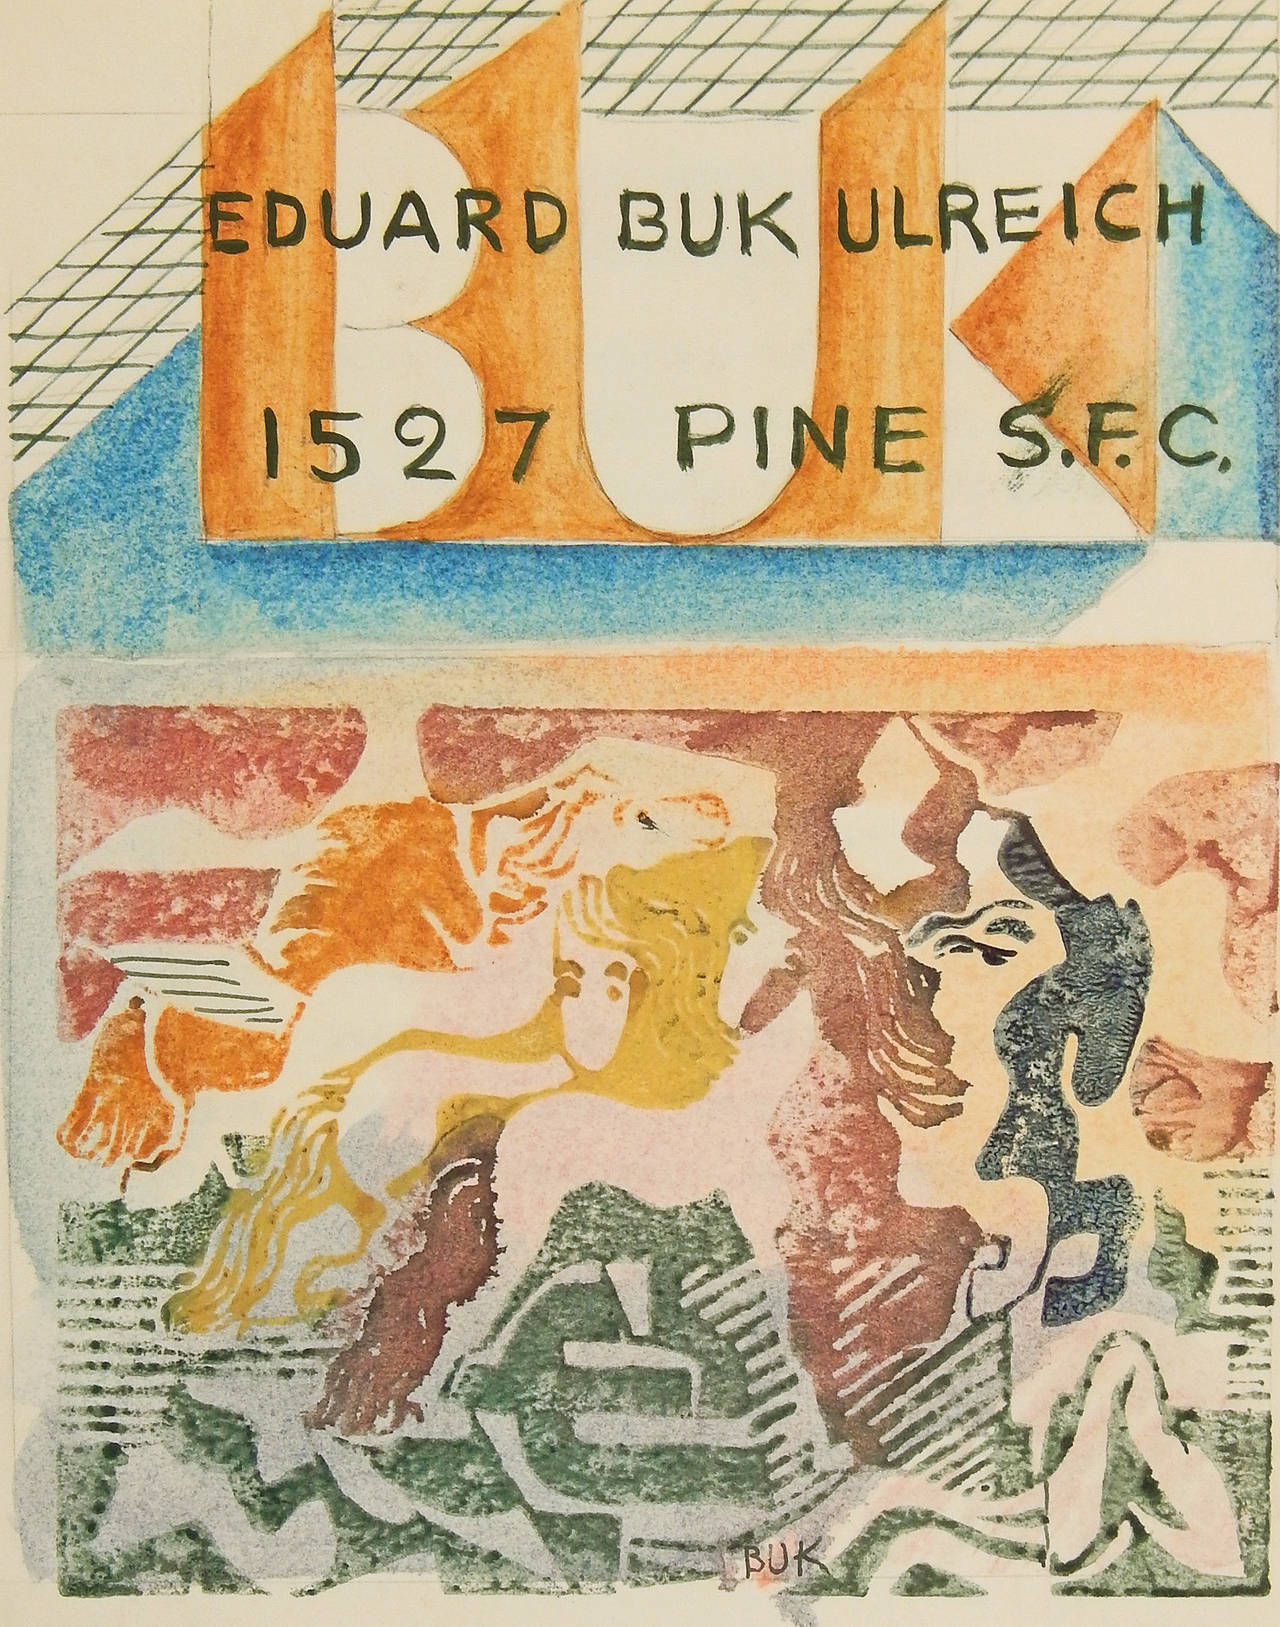 Both a unique work of art and an extraordinary historical document, this print and group of documents were created by Eduard Buk Ulreich, best known as a muralist for Radio City Music Hall, the 1933 World's Fair in Chicago, the Methodist Temple in